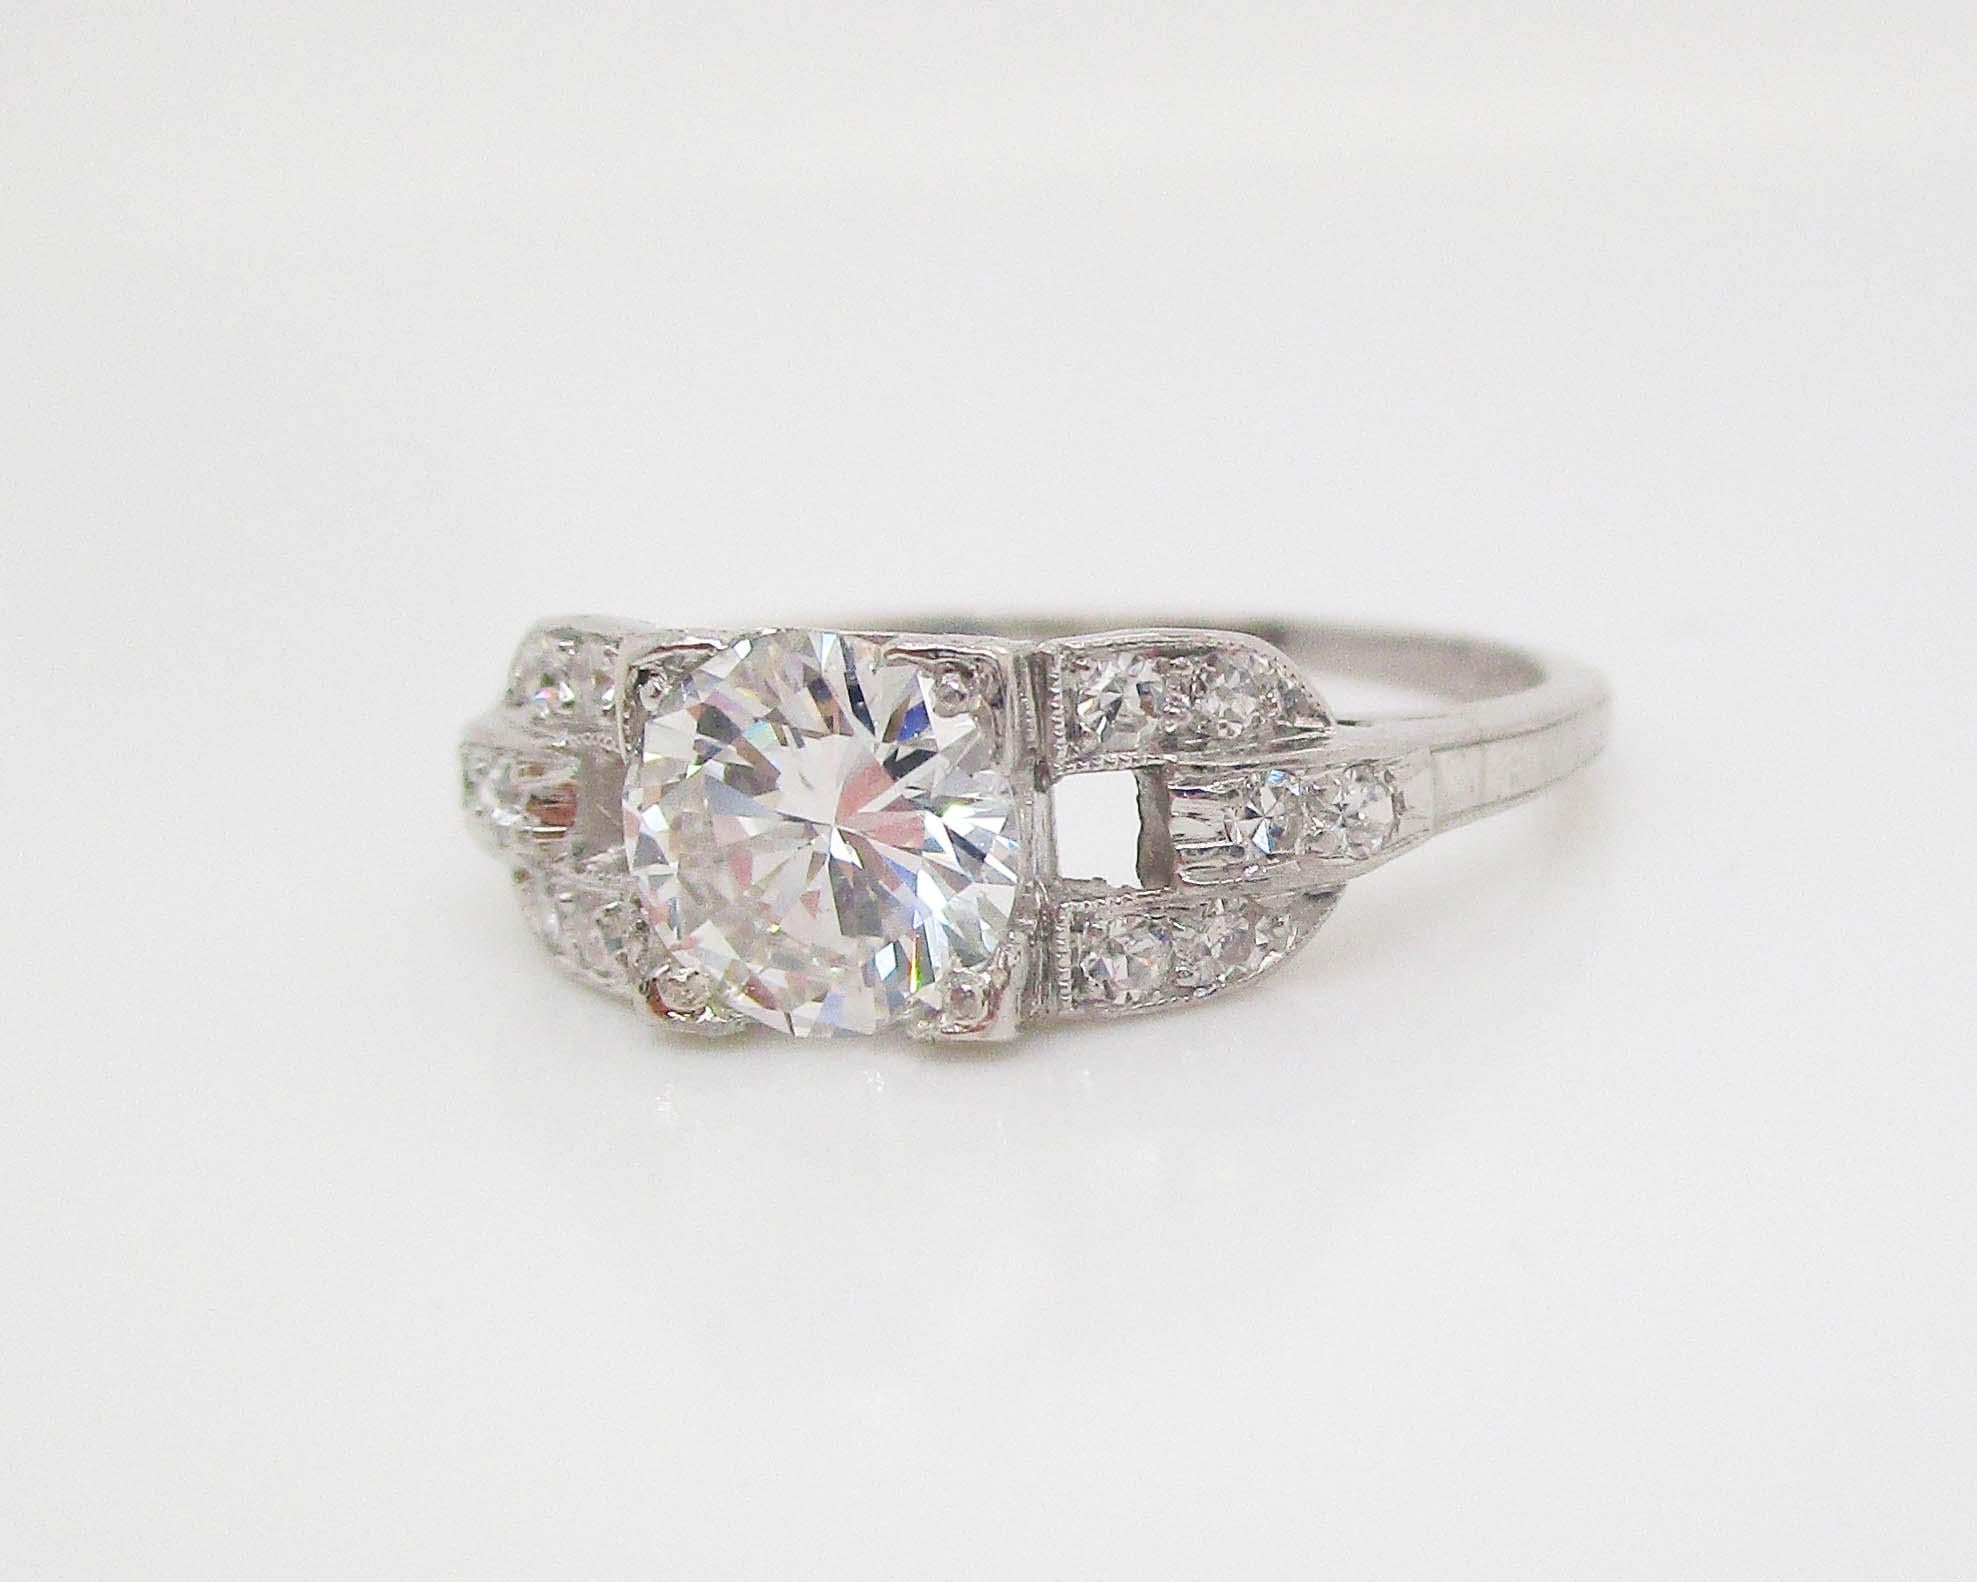 1920's Deco European Cut Diamond Engagement Ring with GIA Report In Excellent Condition For Sale In Lexington, KY